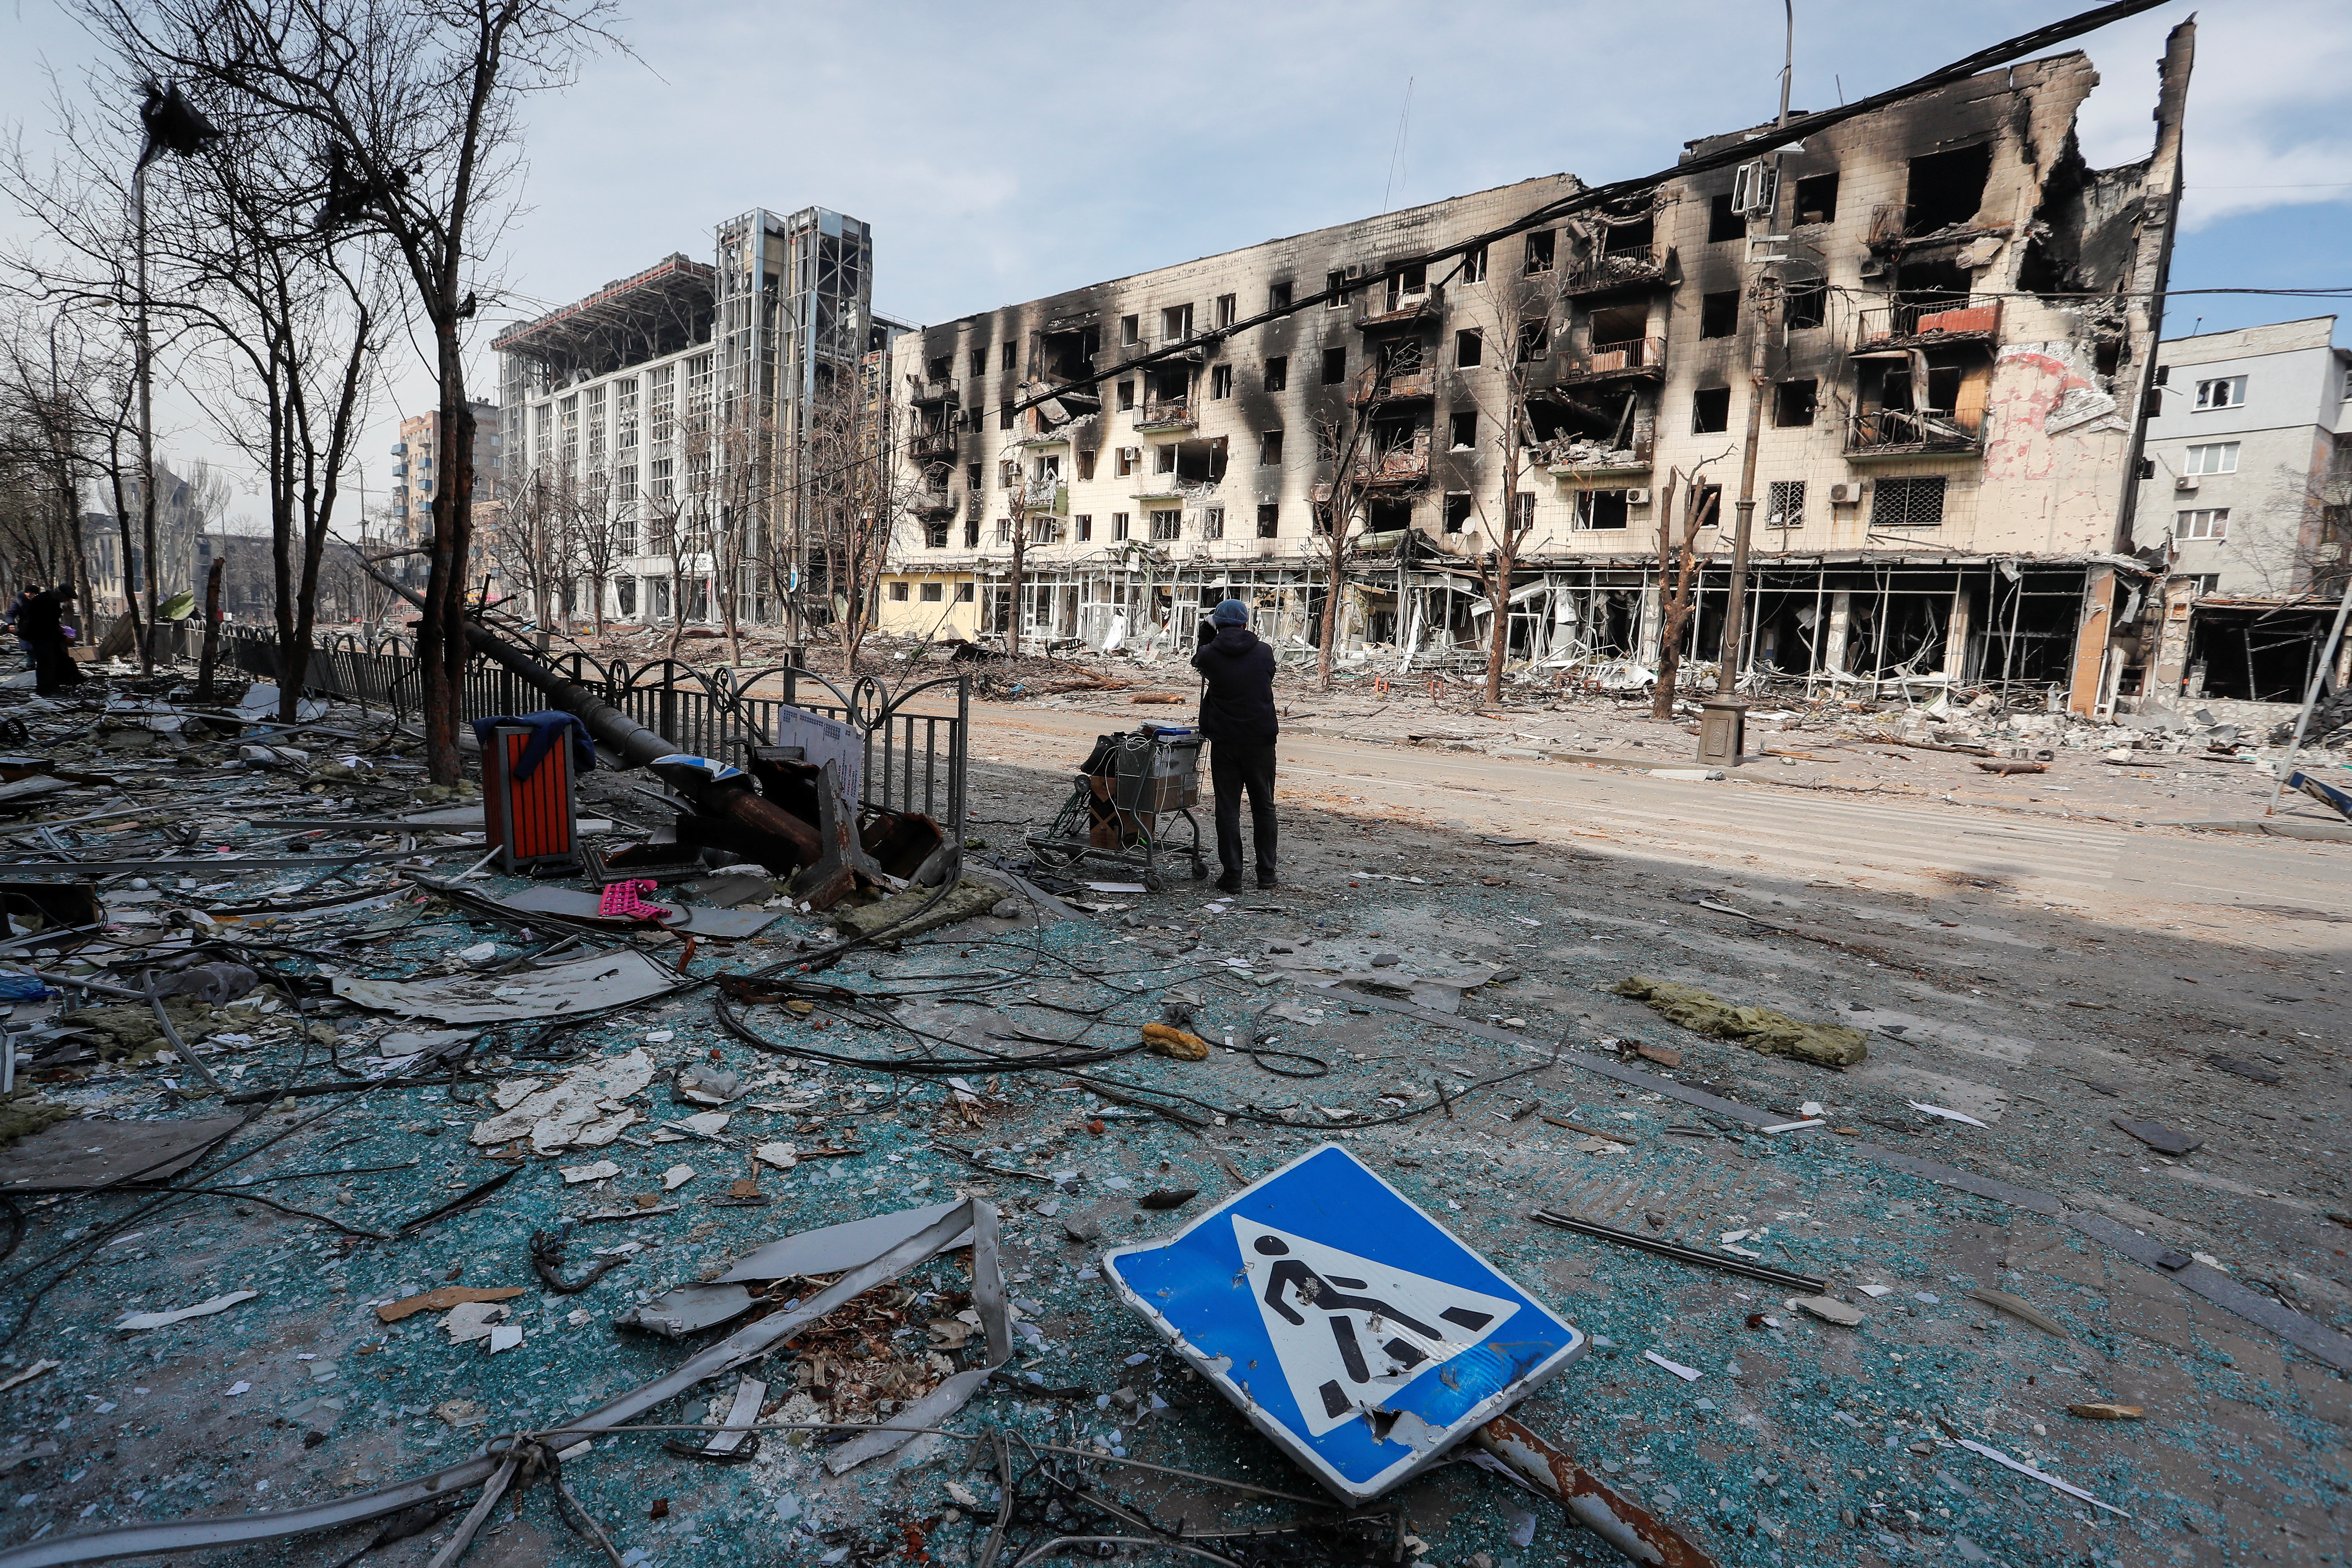 A resident stands with her belongings on a street near a building burnt in the course of the Ukraine-Russia conflict, in Mariupol